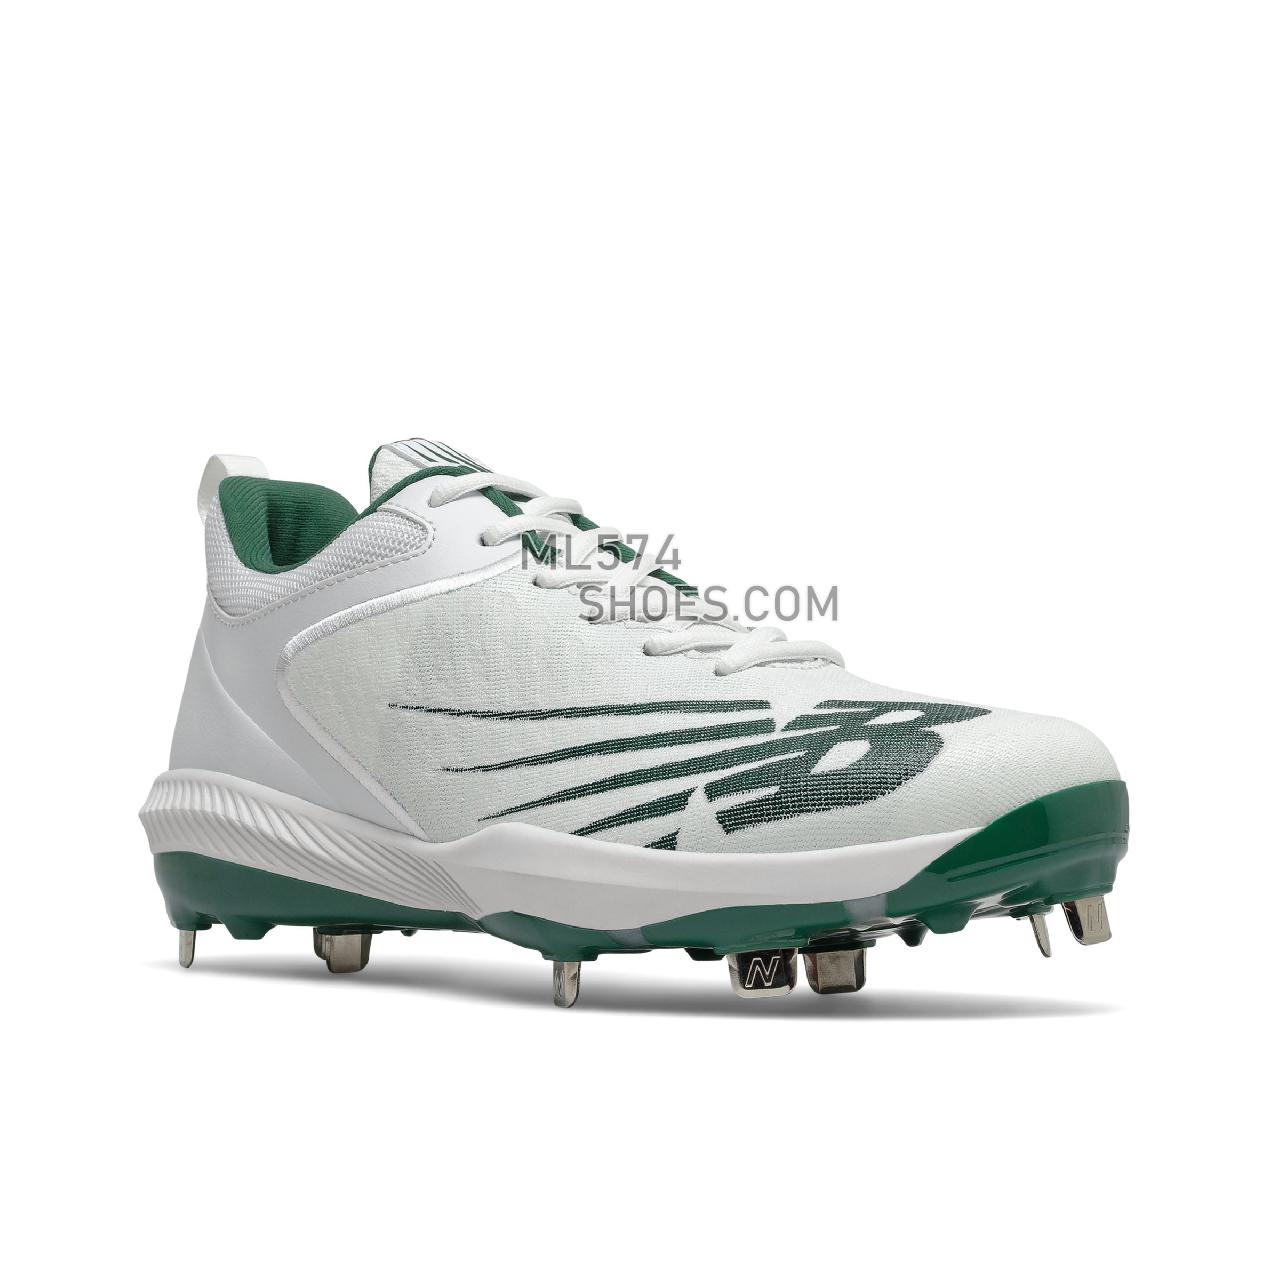 New Balance FuelCell 4040 v6 Metal - Men's Mid-Cut Baseball Cleats - Team Forest Green with White - L4040TF6